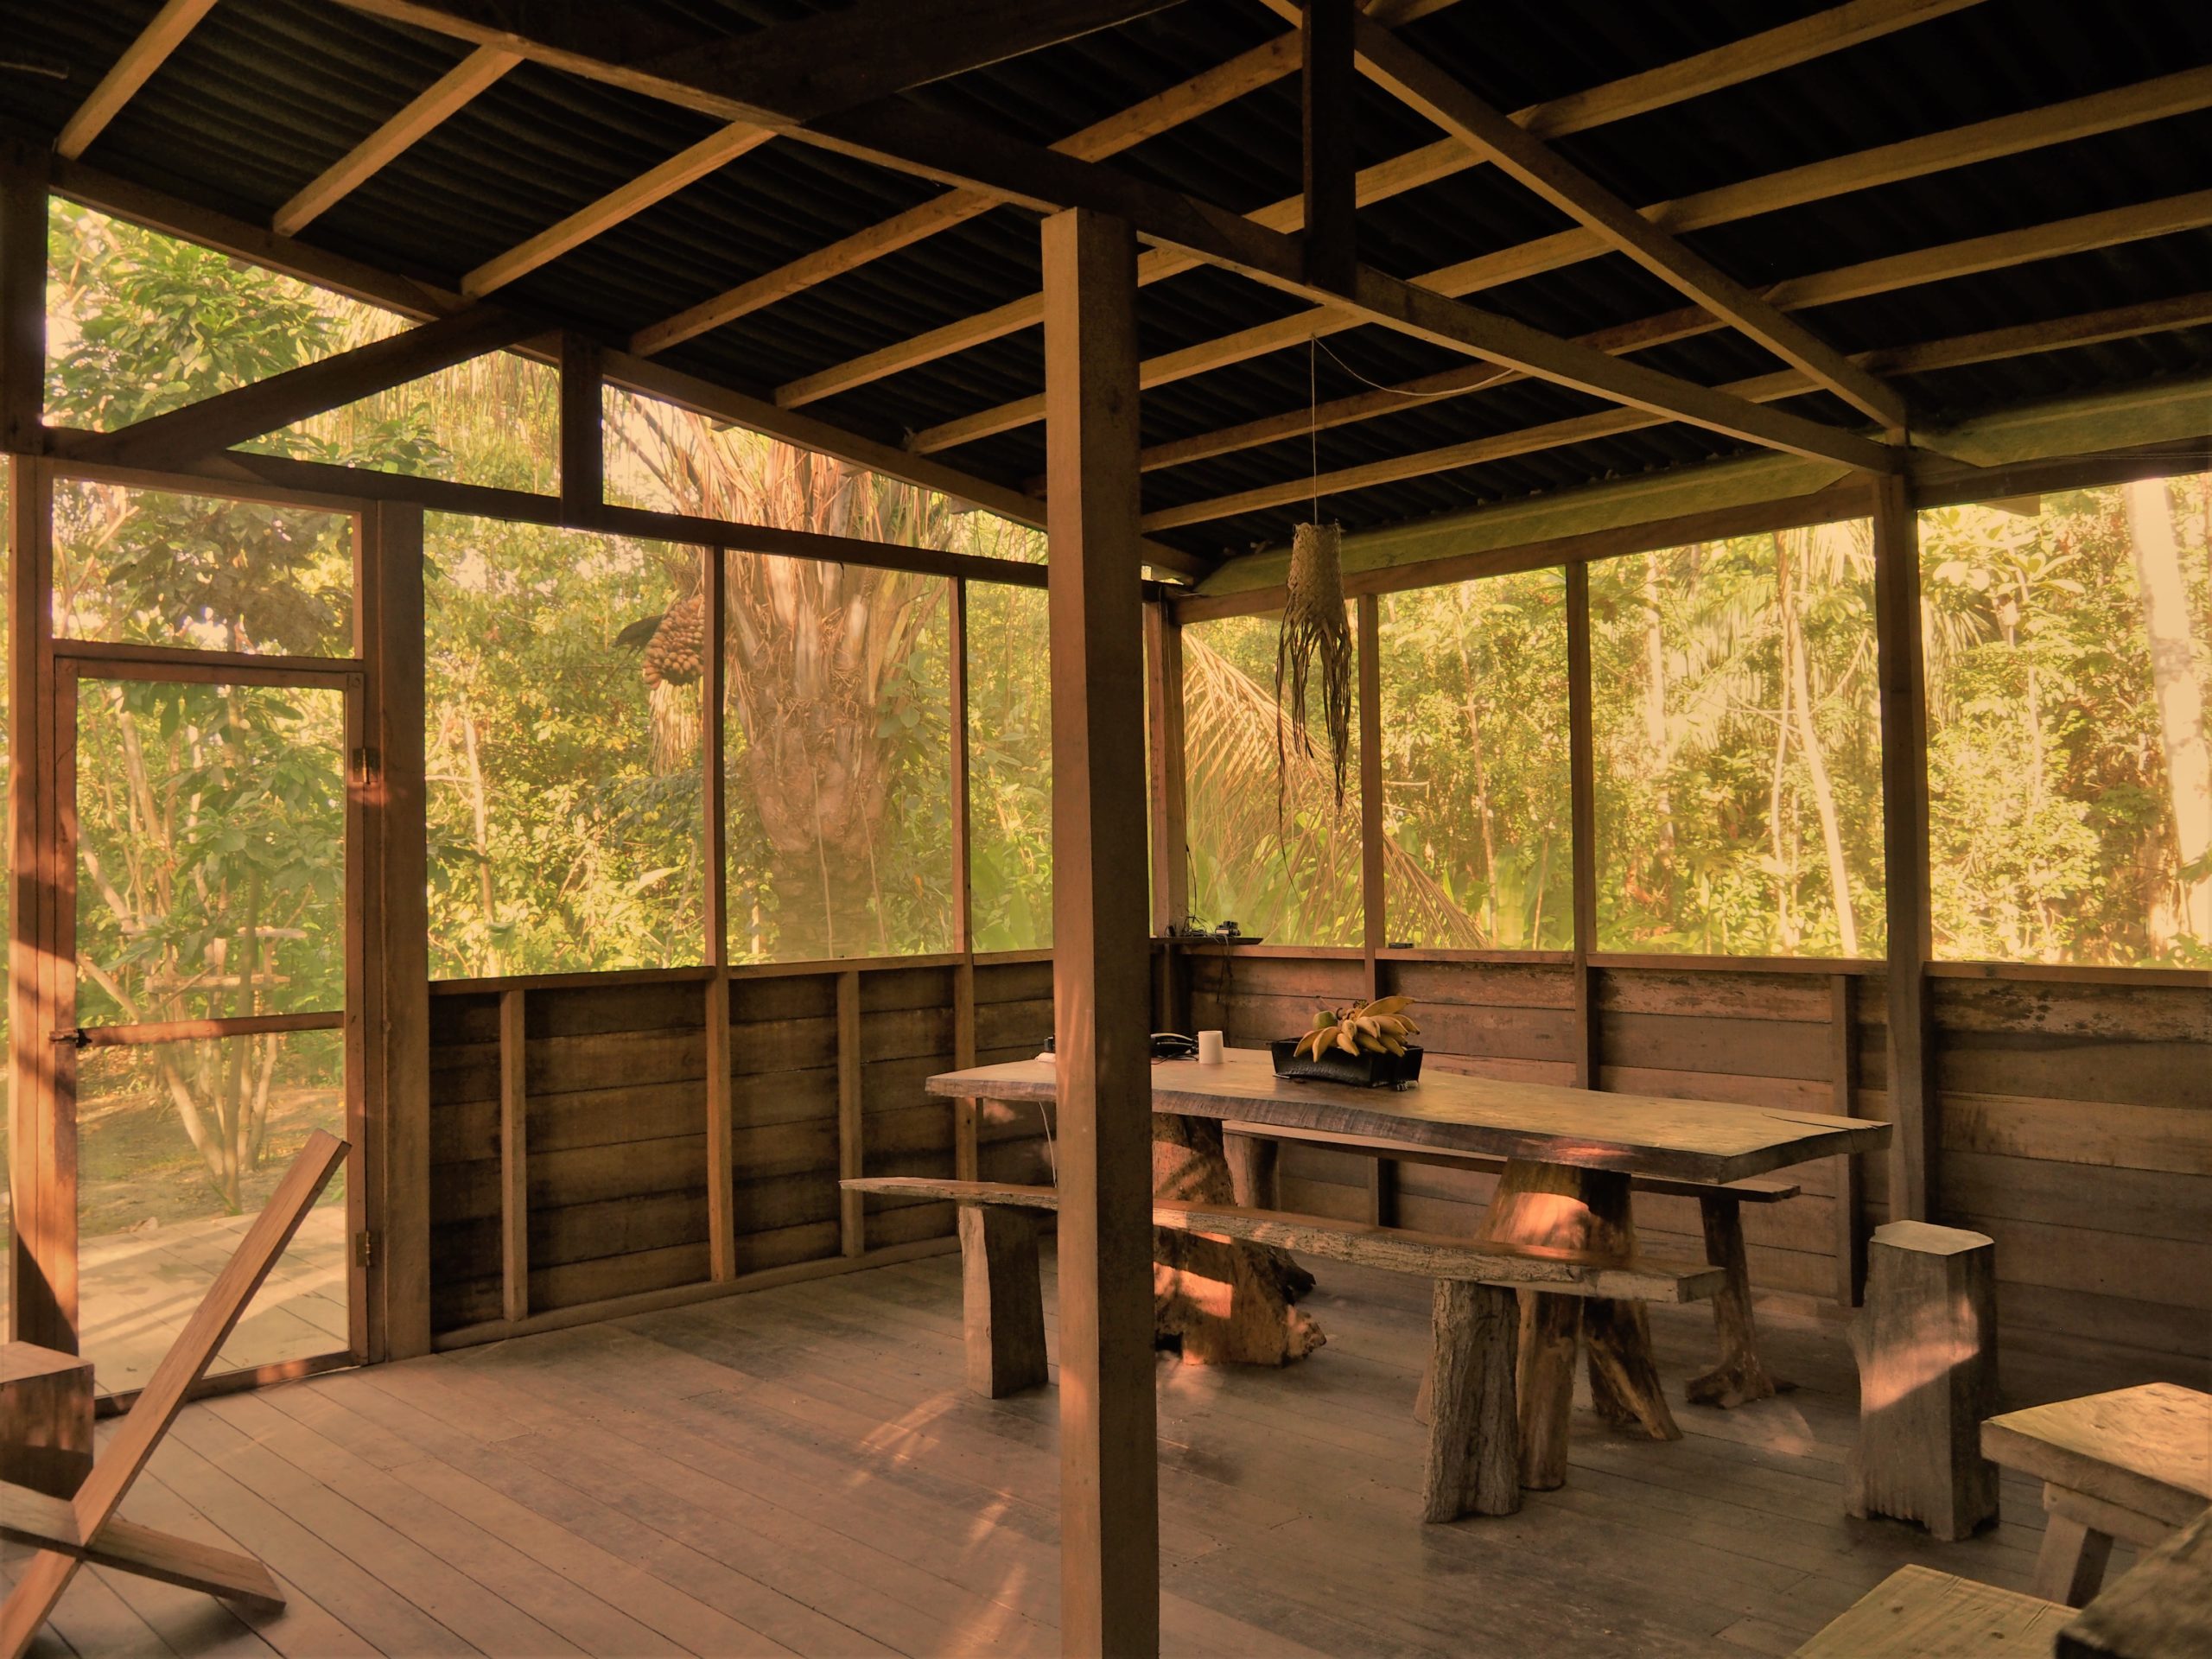 Thumbnail for the post titled: Stay at The Reserve–Private Rooms & Rainforest Excursions Available